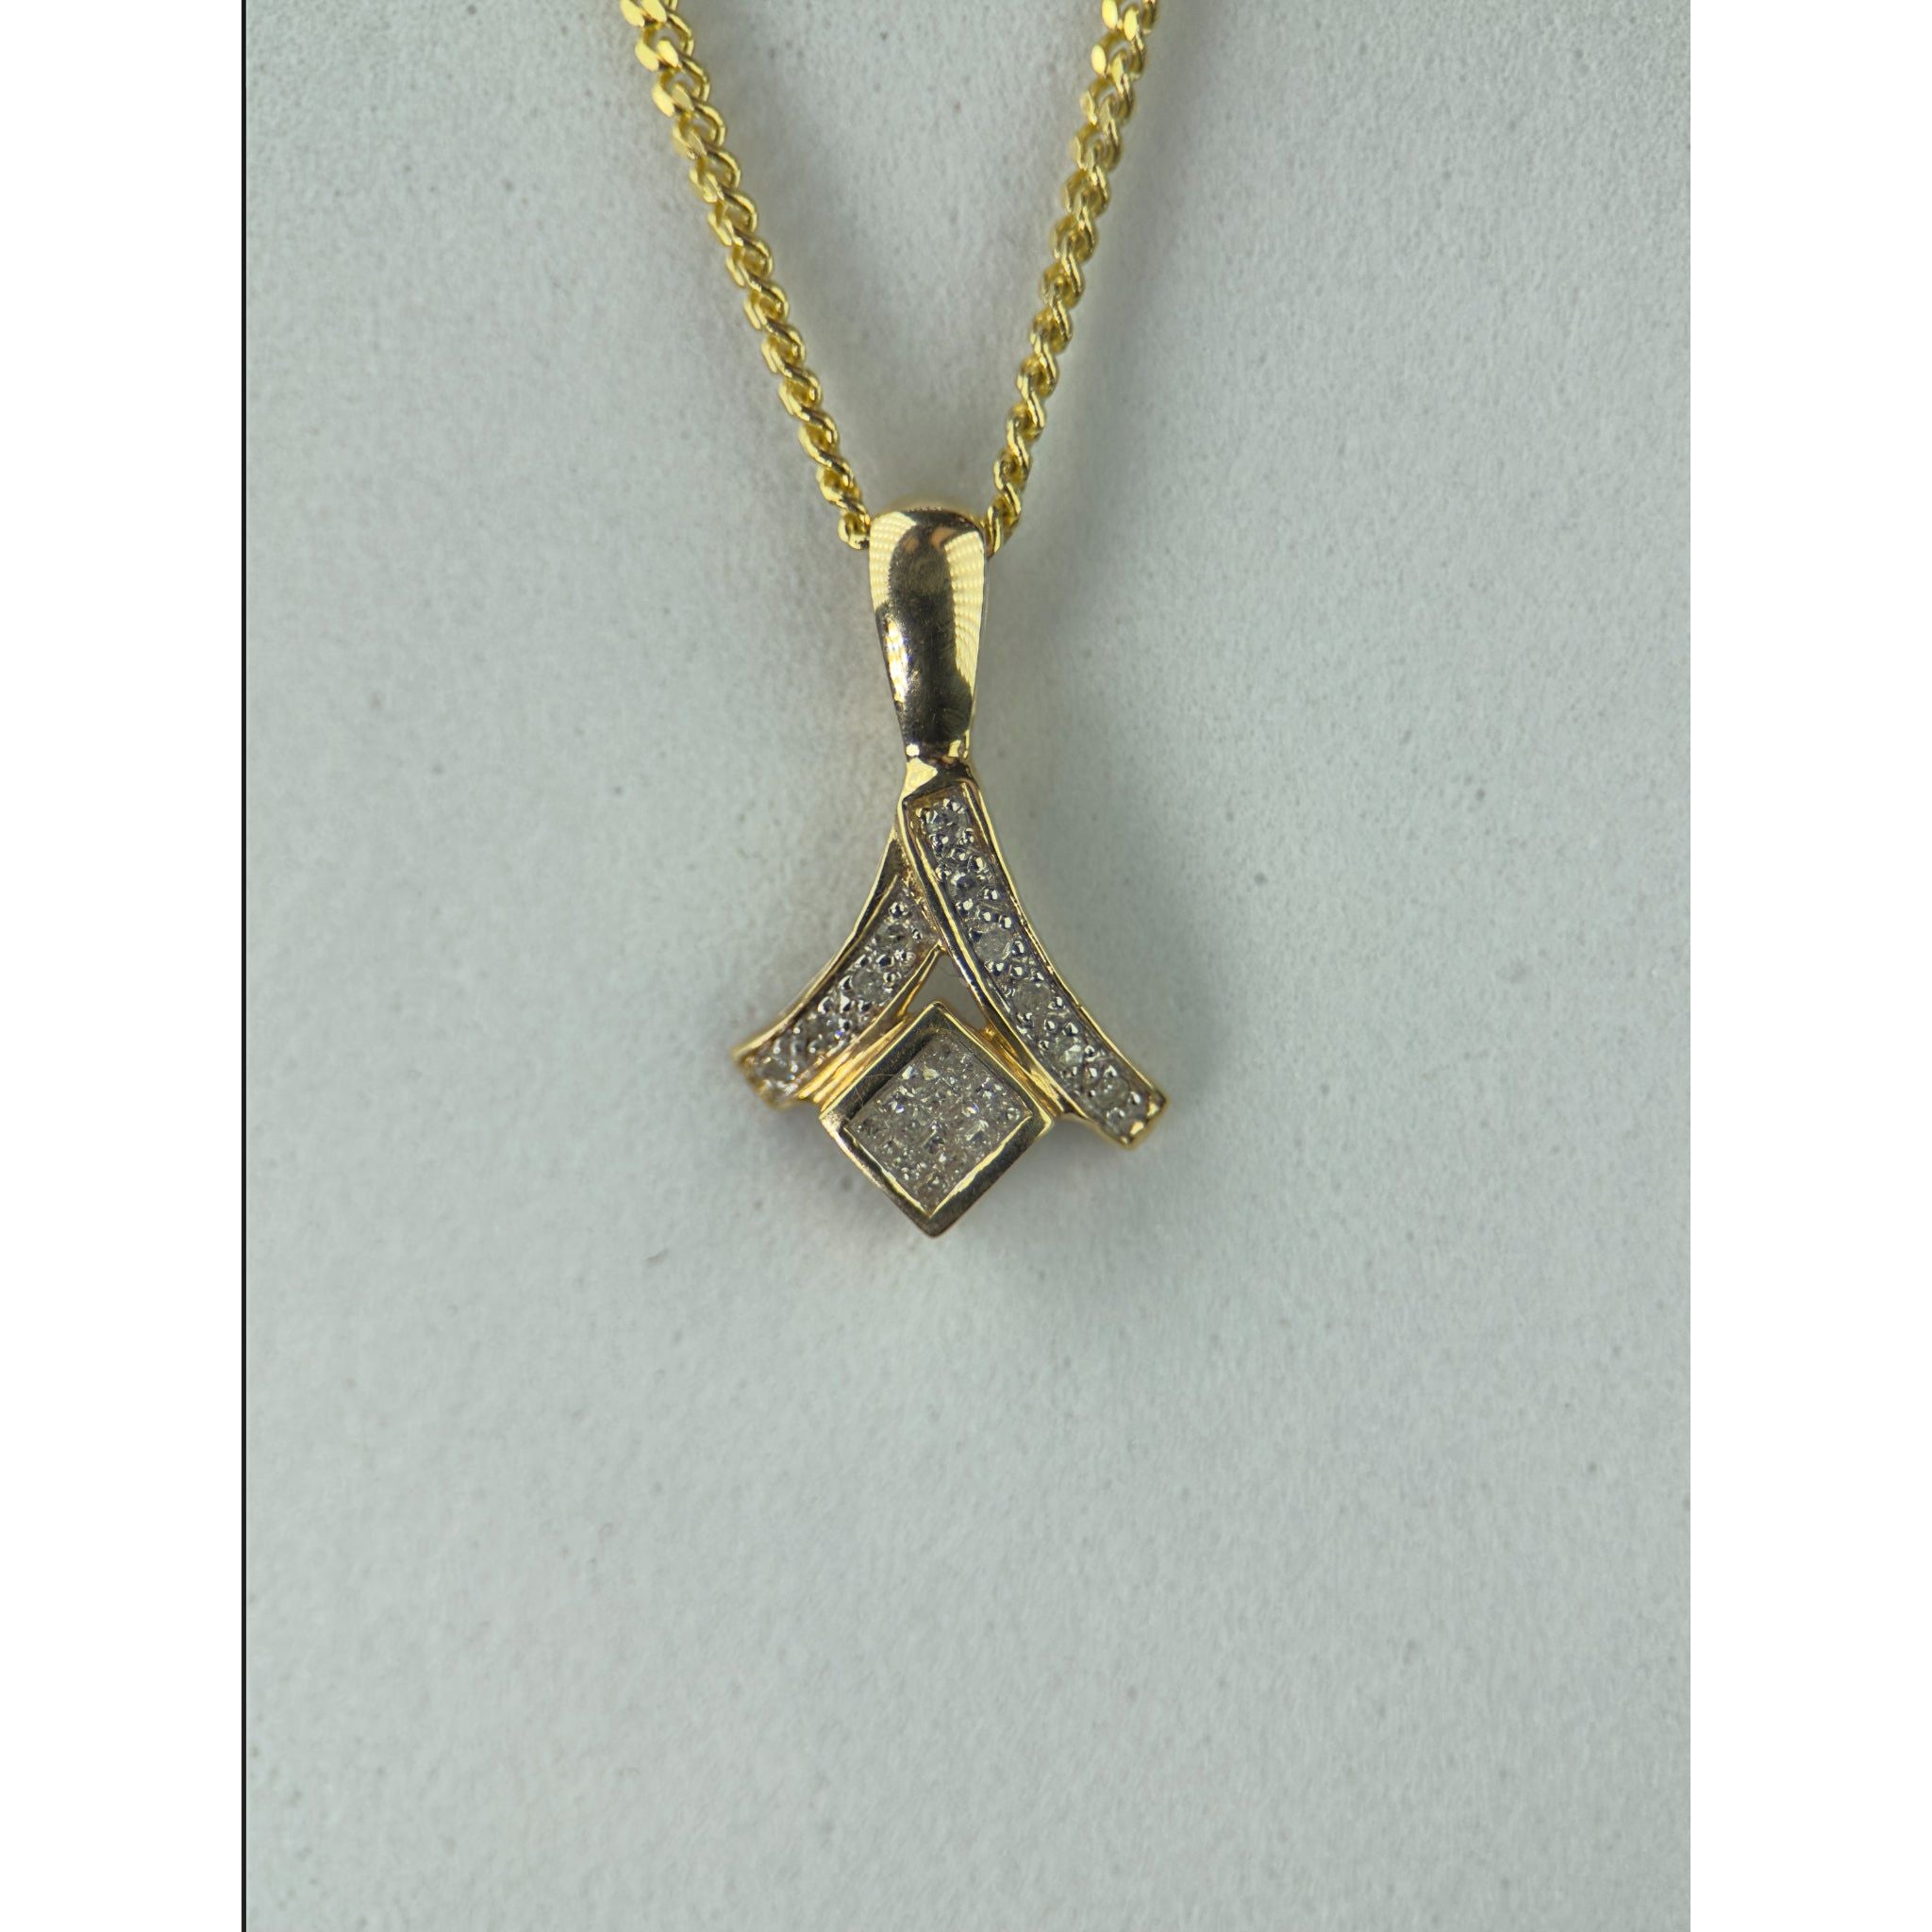 DR2214 - 14K Yellow Gold - Diamond - Pendant and Chain